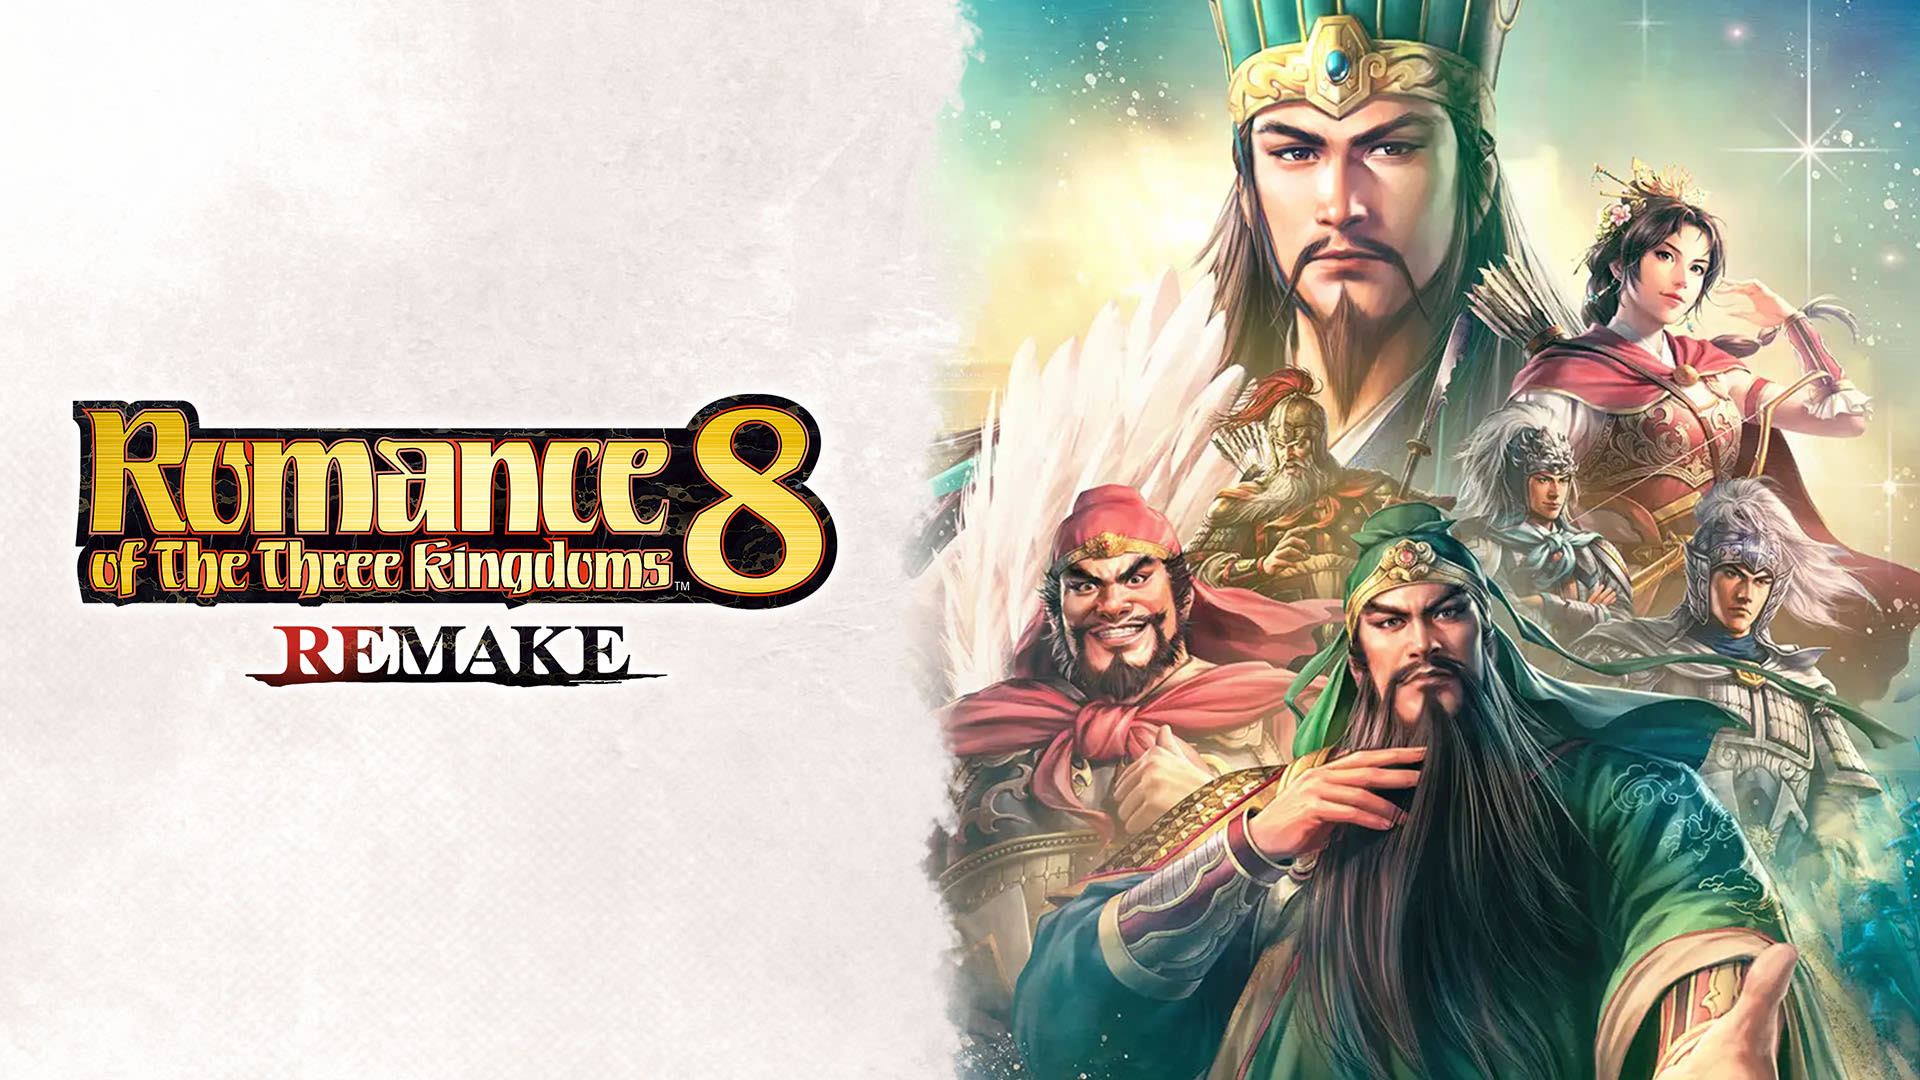 Romance of the Three Kingdoms 8 Remake launches October 24